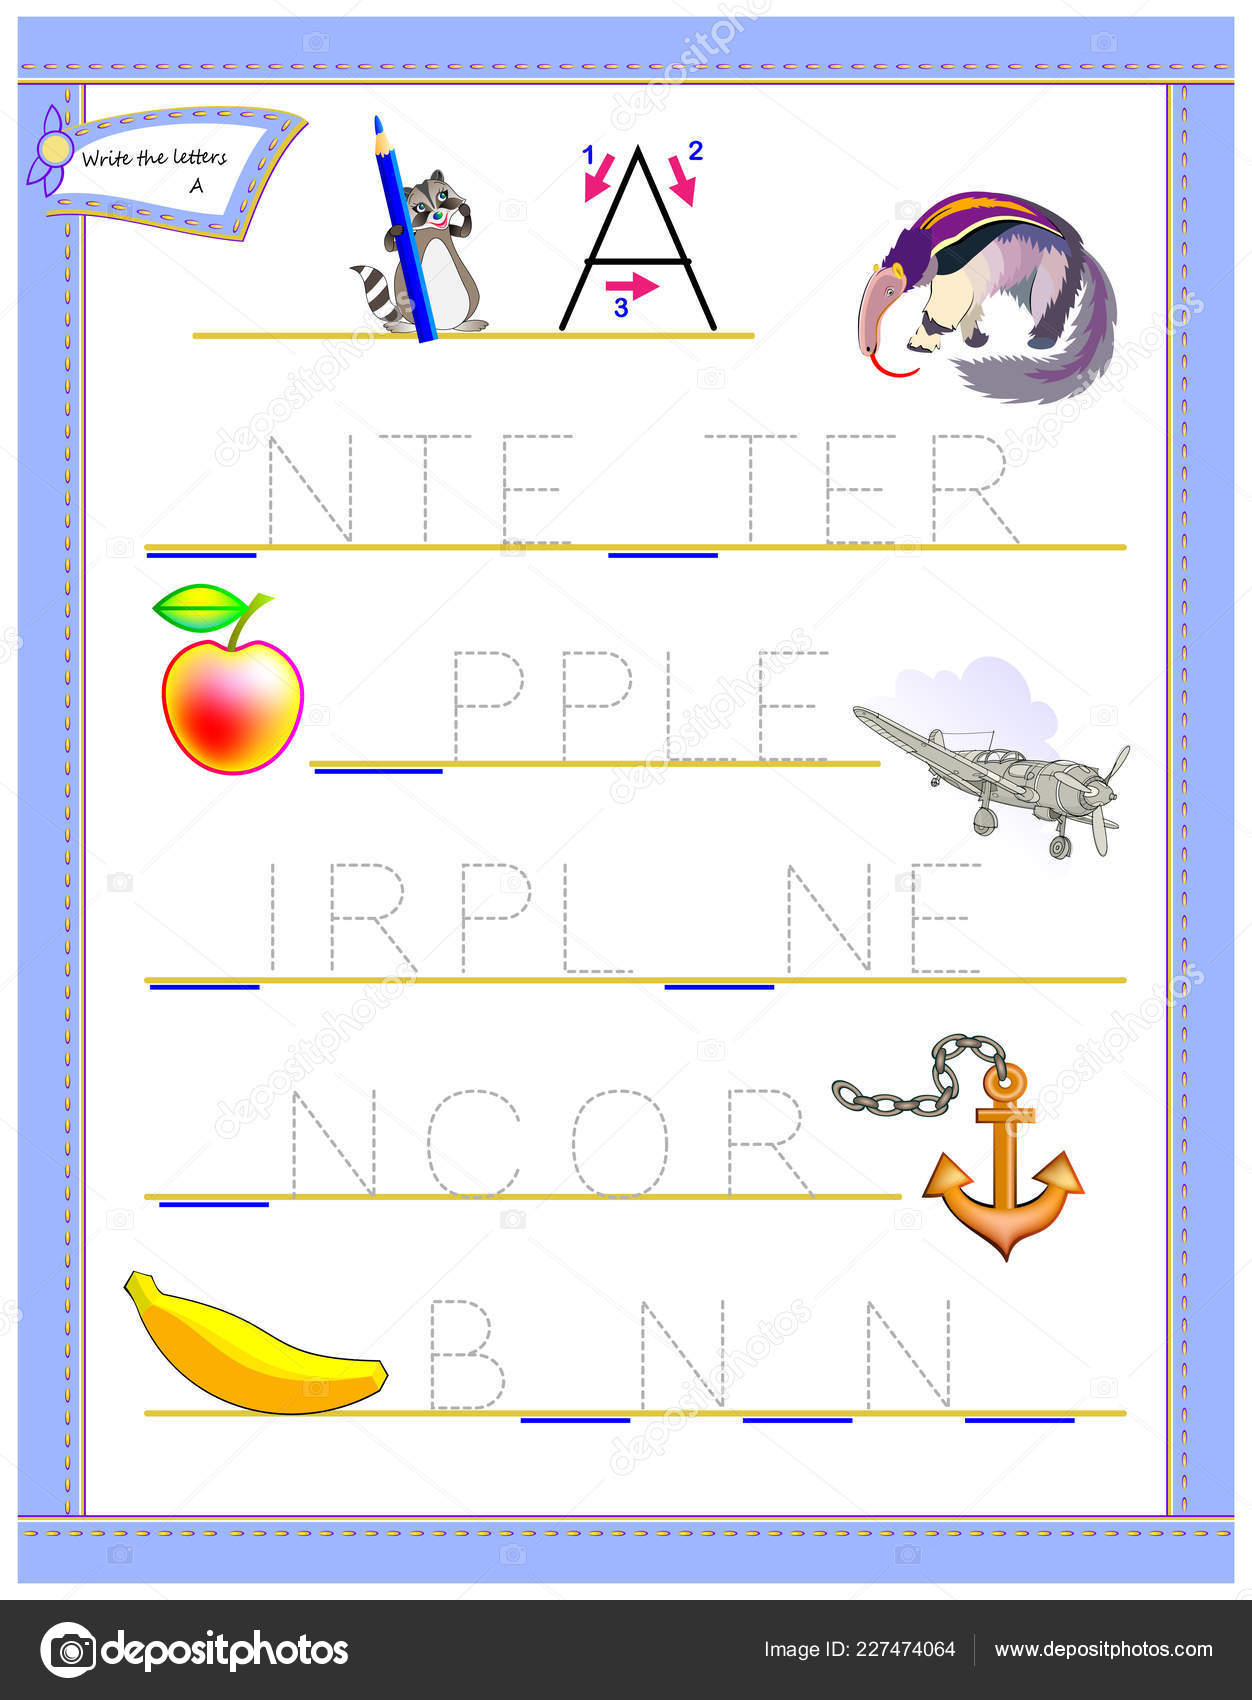 Tracing Letter Study English Alphabet Worksheet Kids Logic in Alphabet Tracing Game